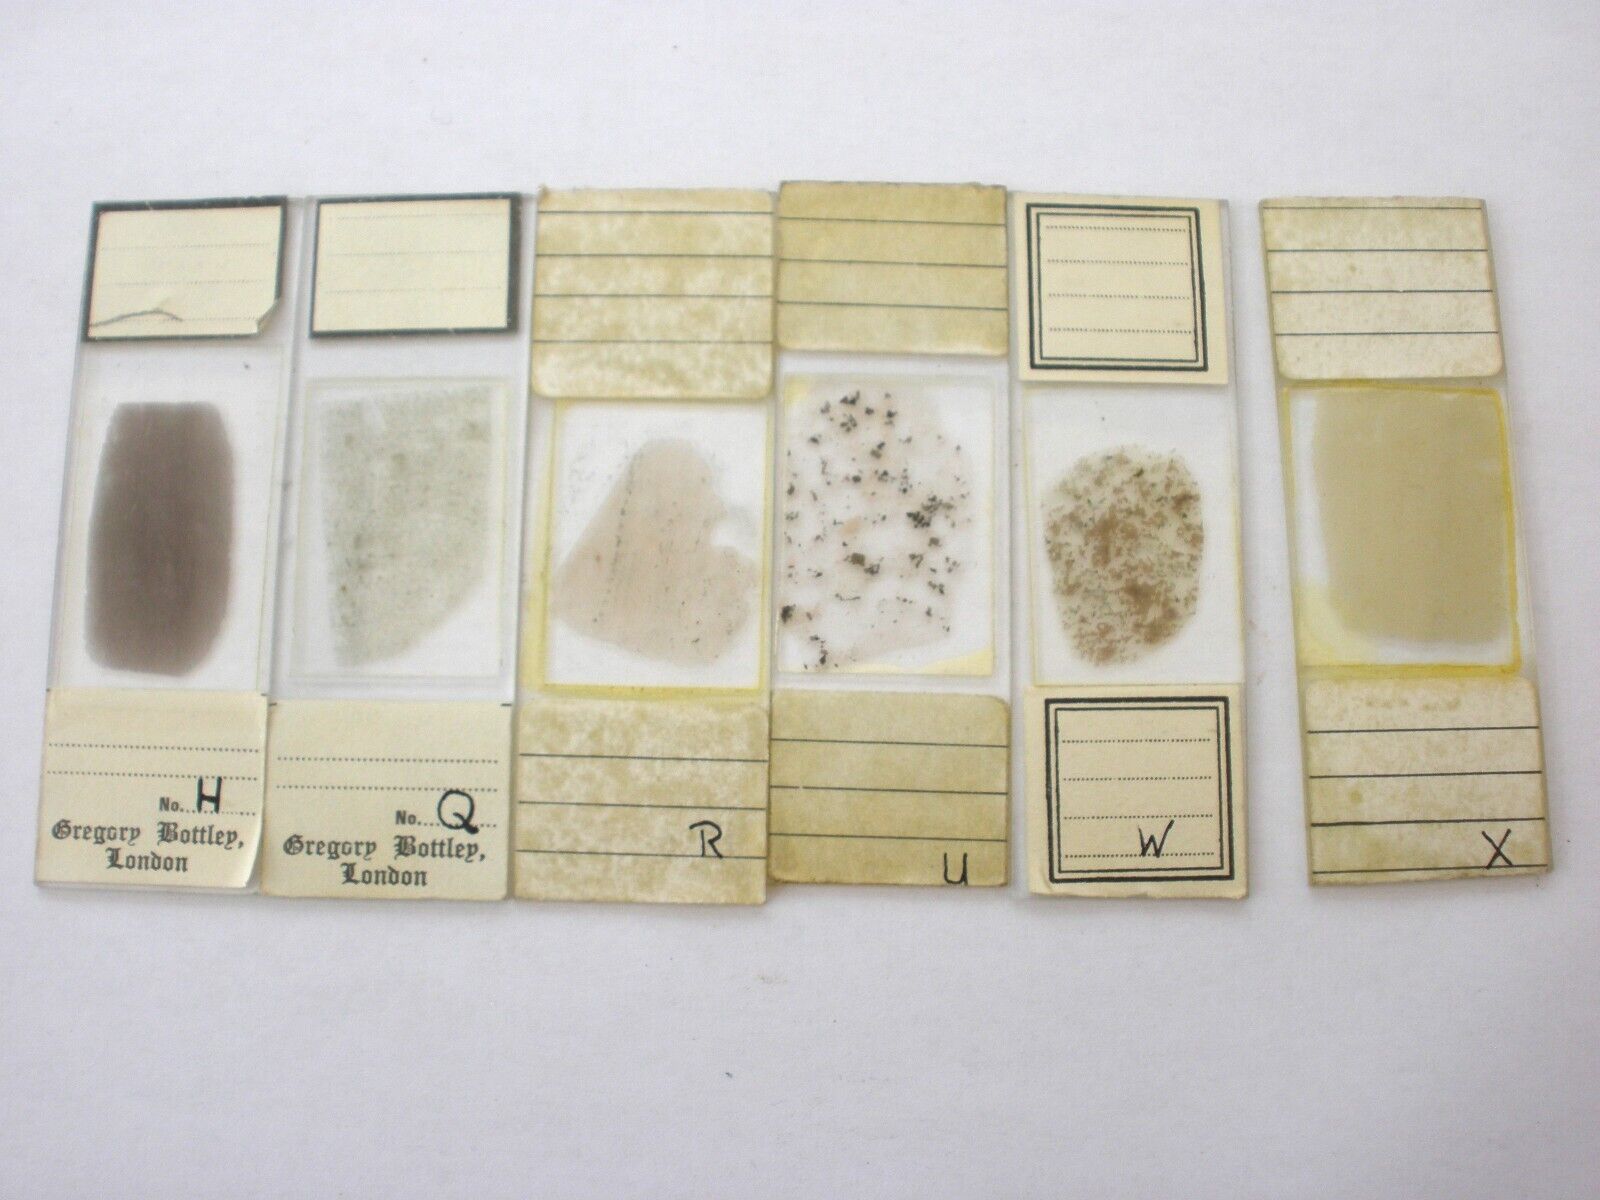 6 Antique/Vintage  Microscope  Slides. Petrology  by Gregory and Bottley.